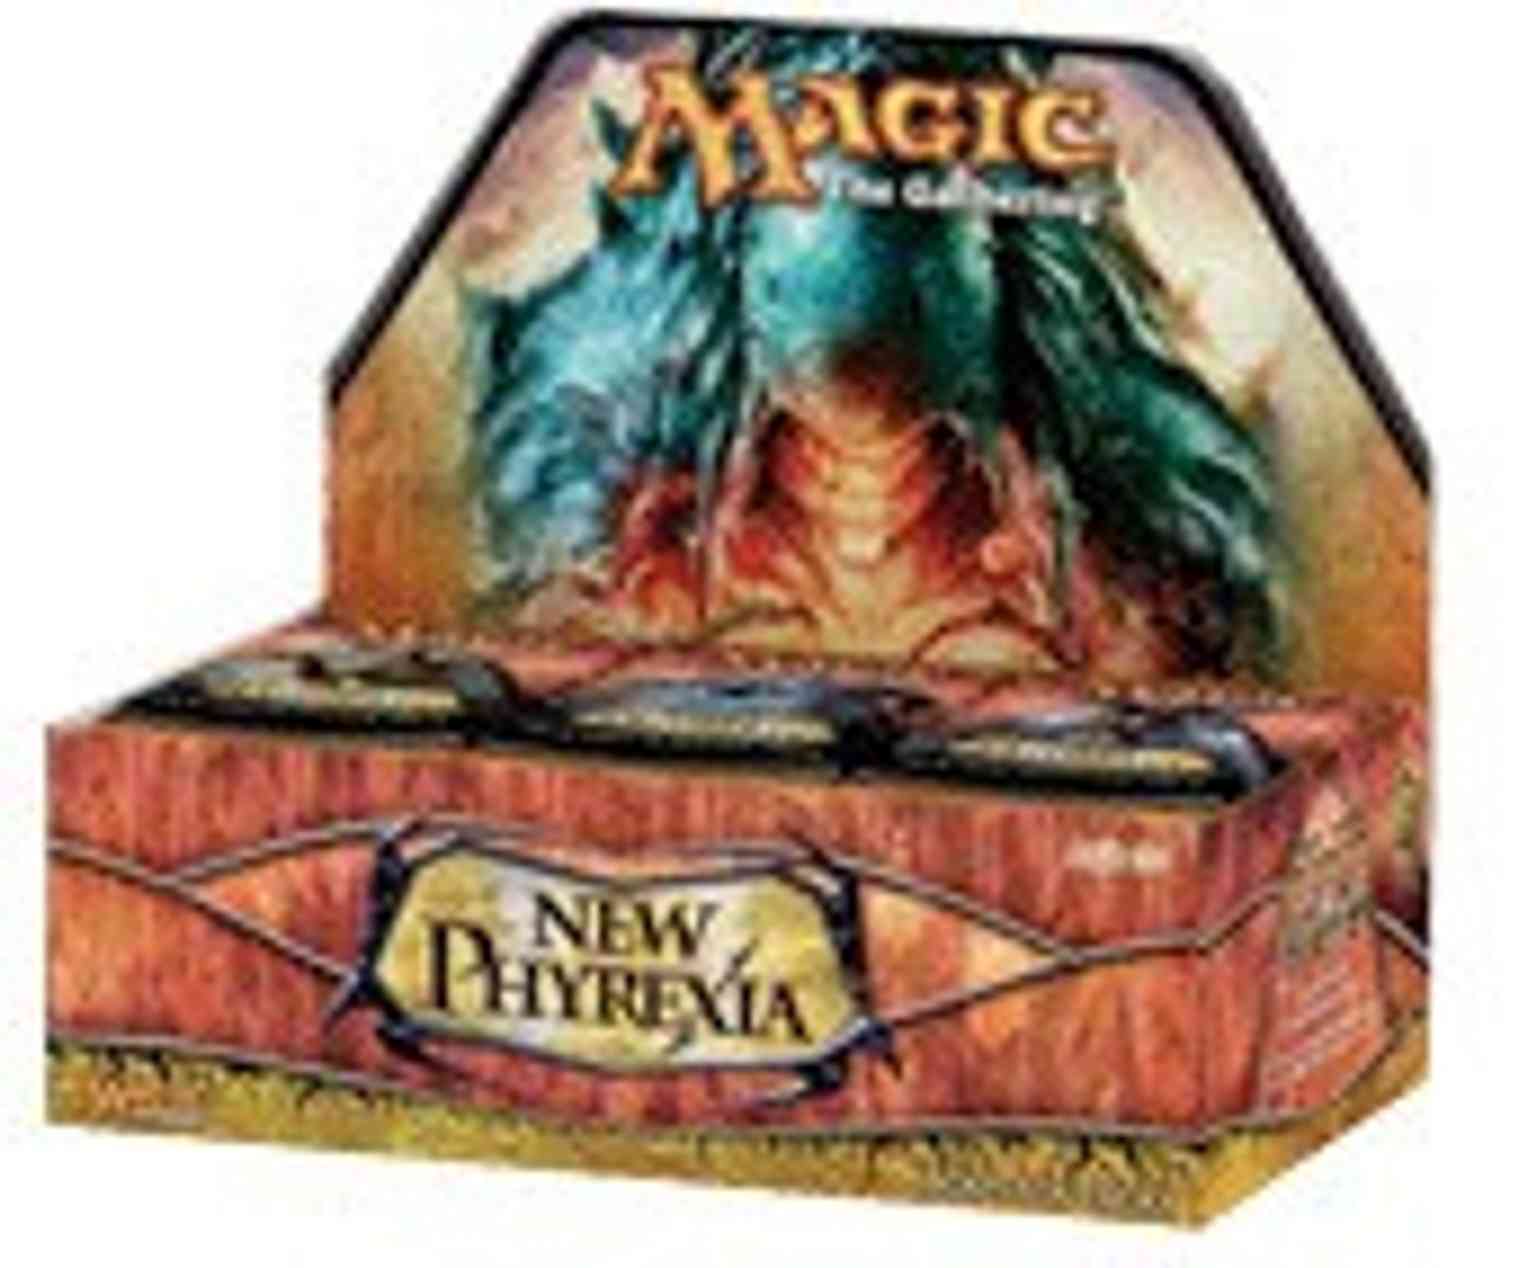 New Phyrexia - Booster Box magic card front